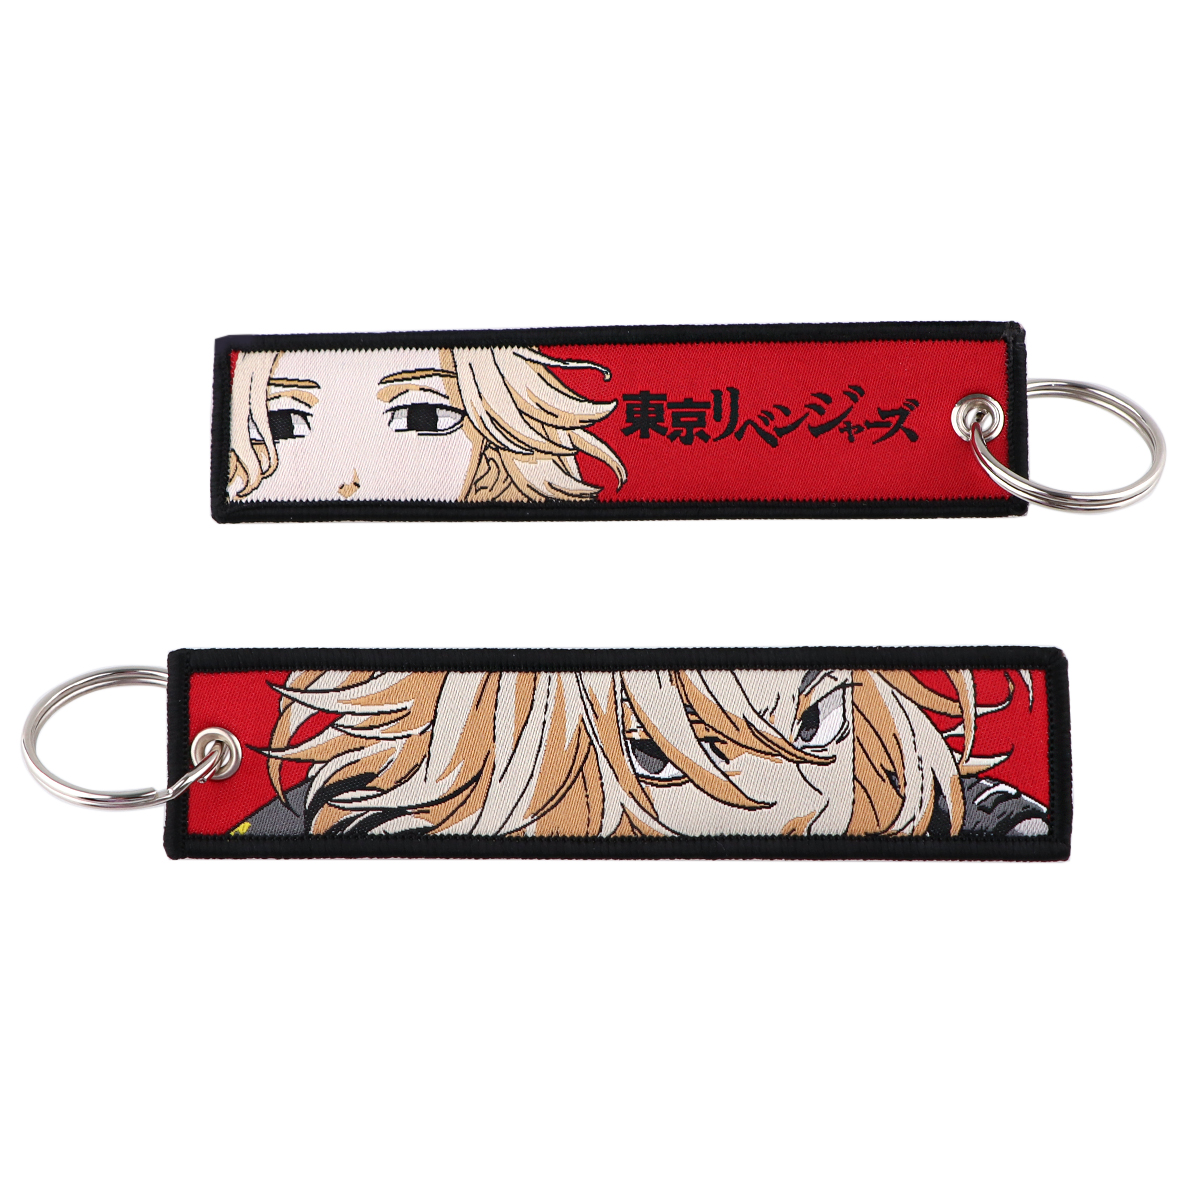 Japanese Anime Embroidered Keychain Key Tag Tokyo Revengers Key Fobs Motorcycles Cars Backpack Chaveiro Fashion Key 3 - Tokyo Revengers Merch